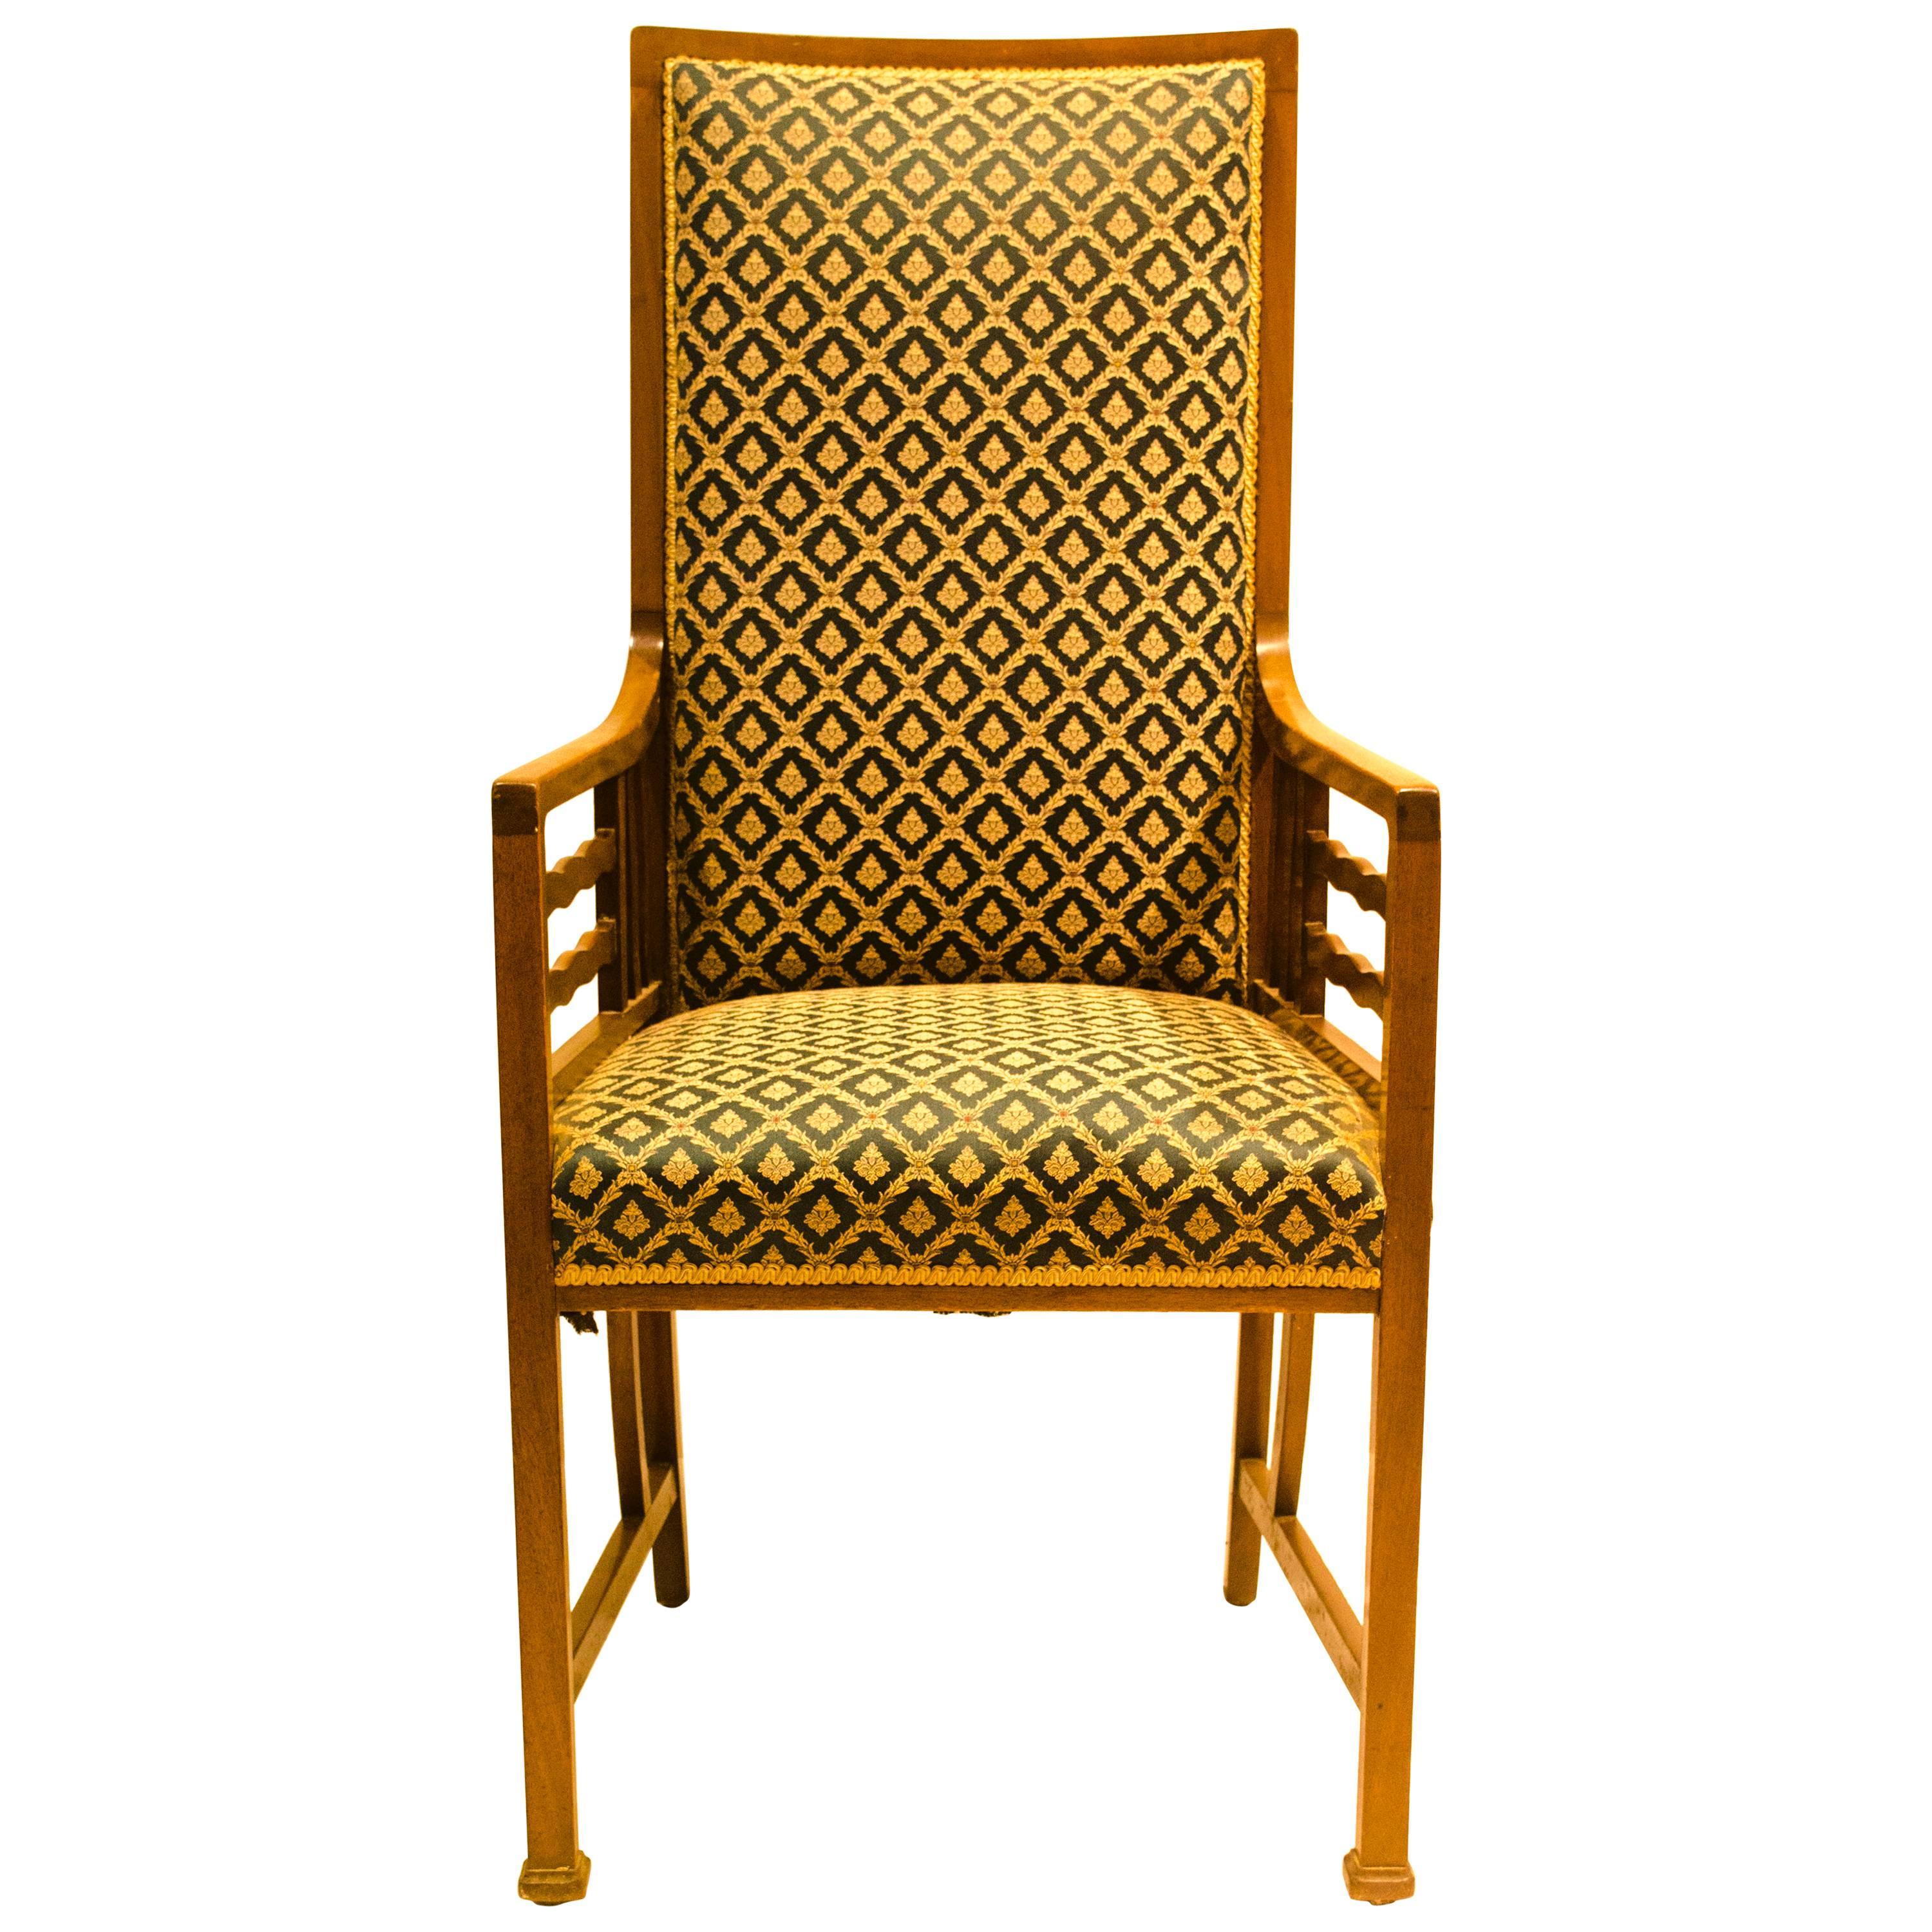 Anglo-Japanese Walnut Armchair Attributed to Liberty and Co